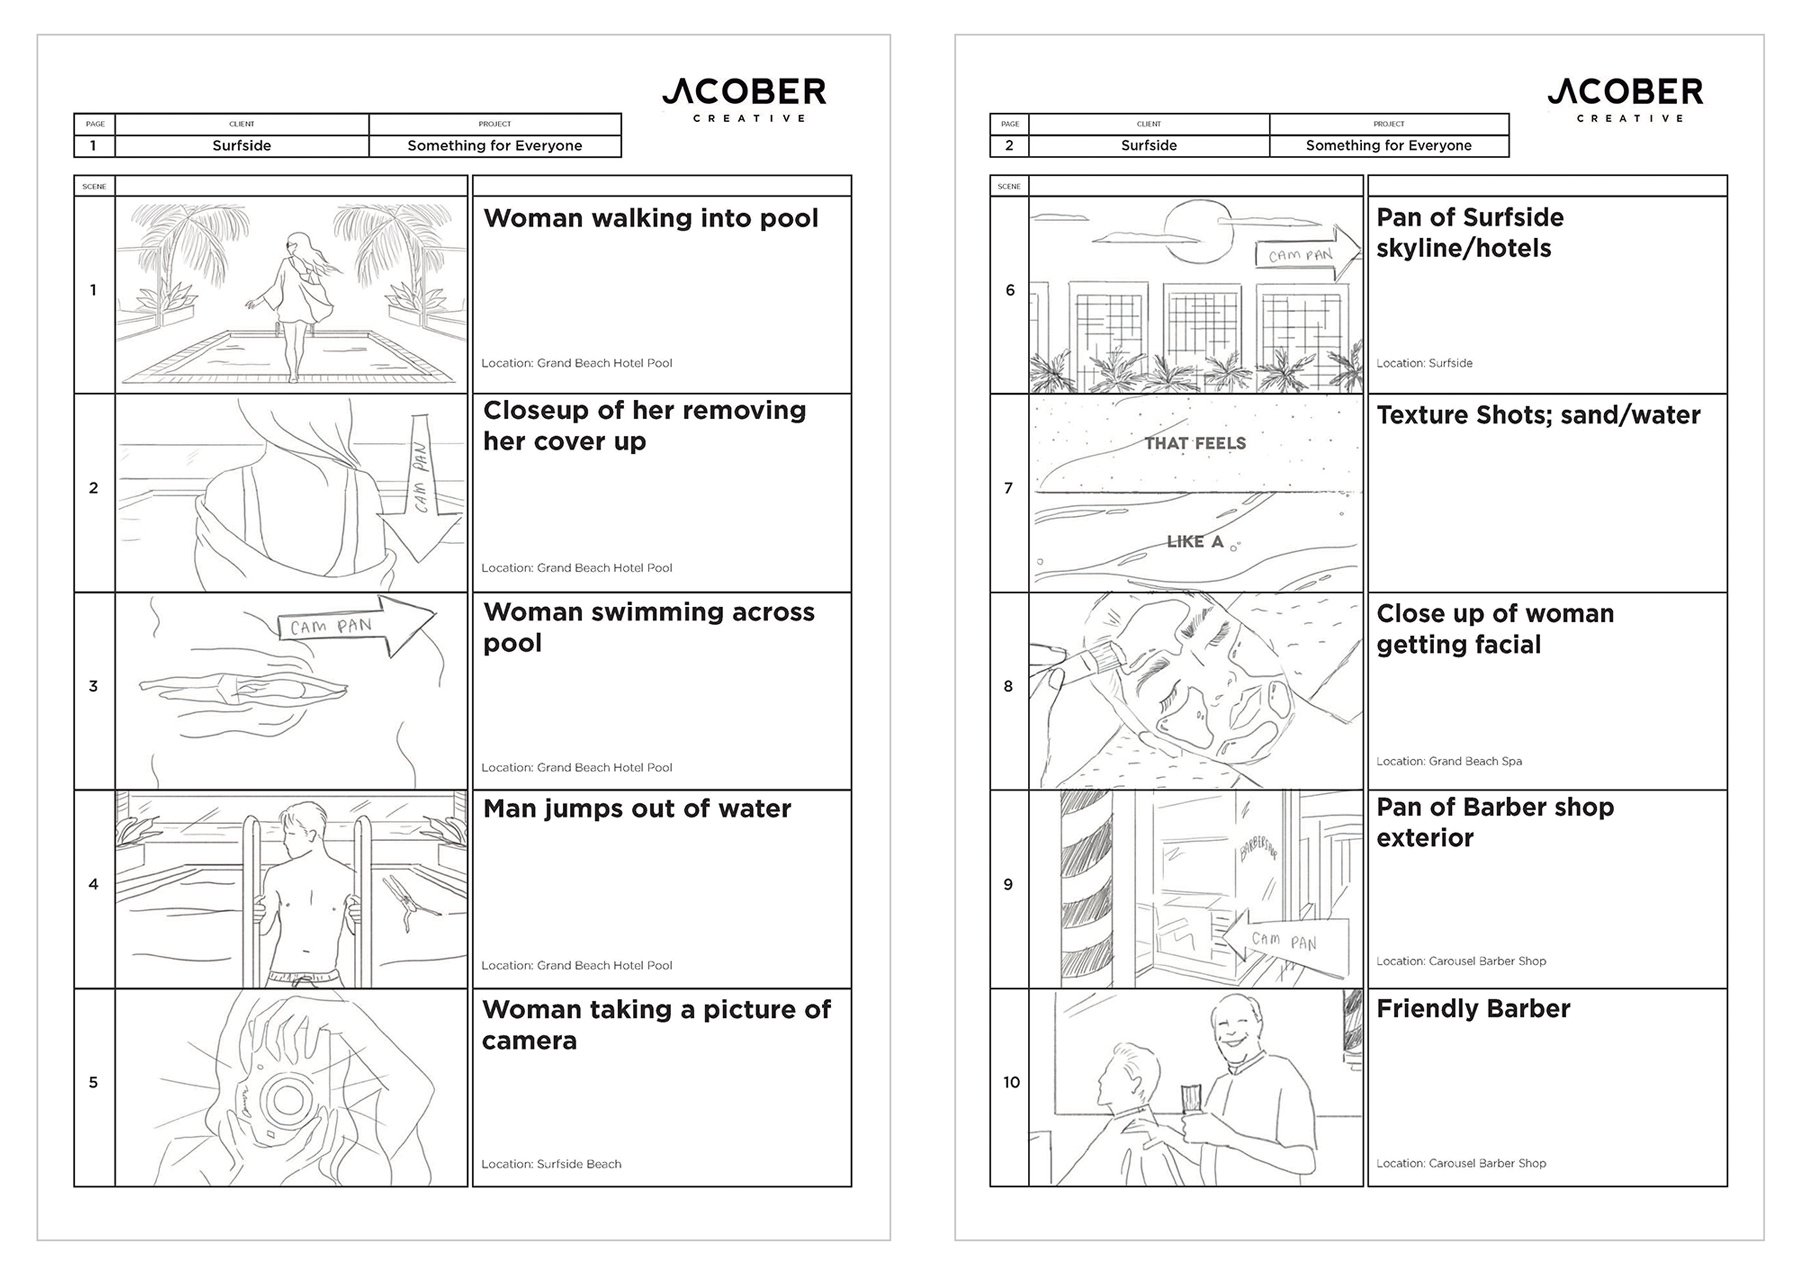 Storyboard of "Something for Everyone" Surfside Video